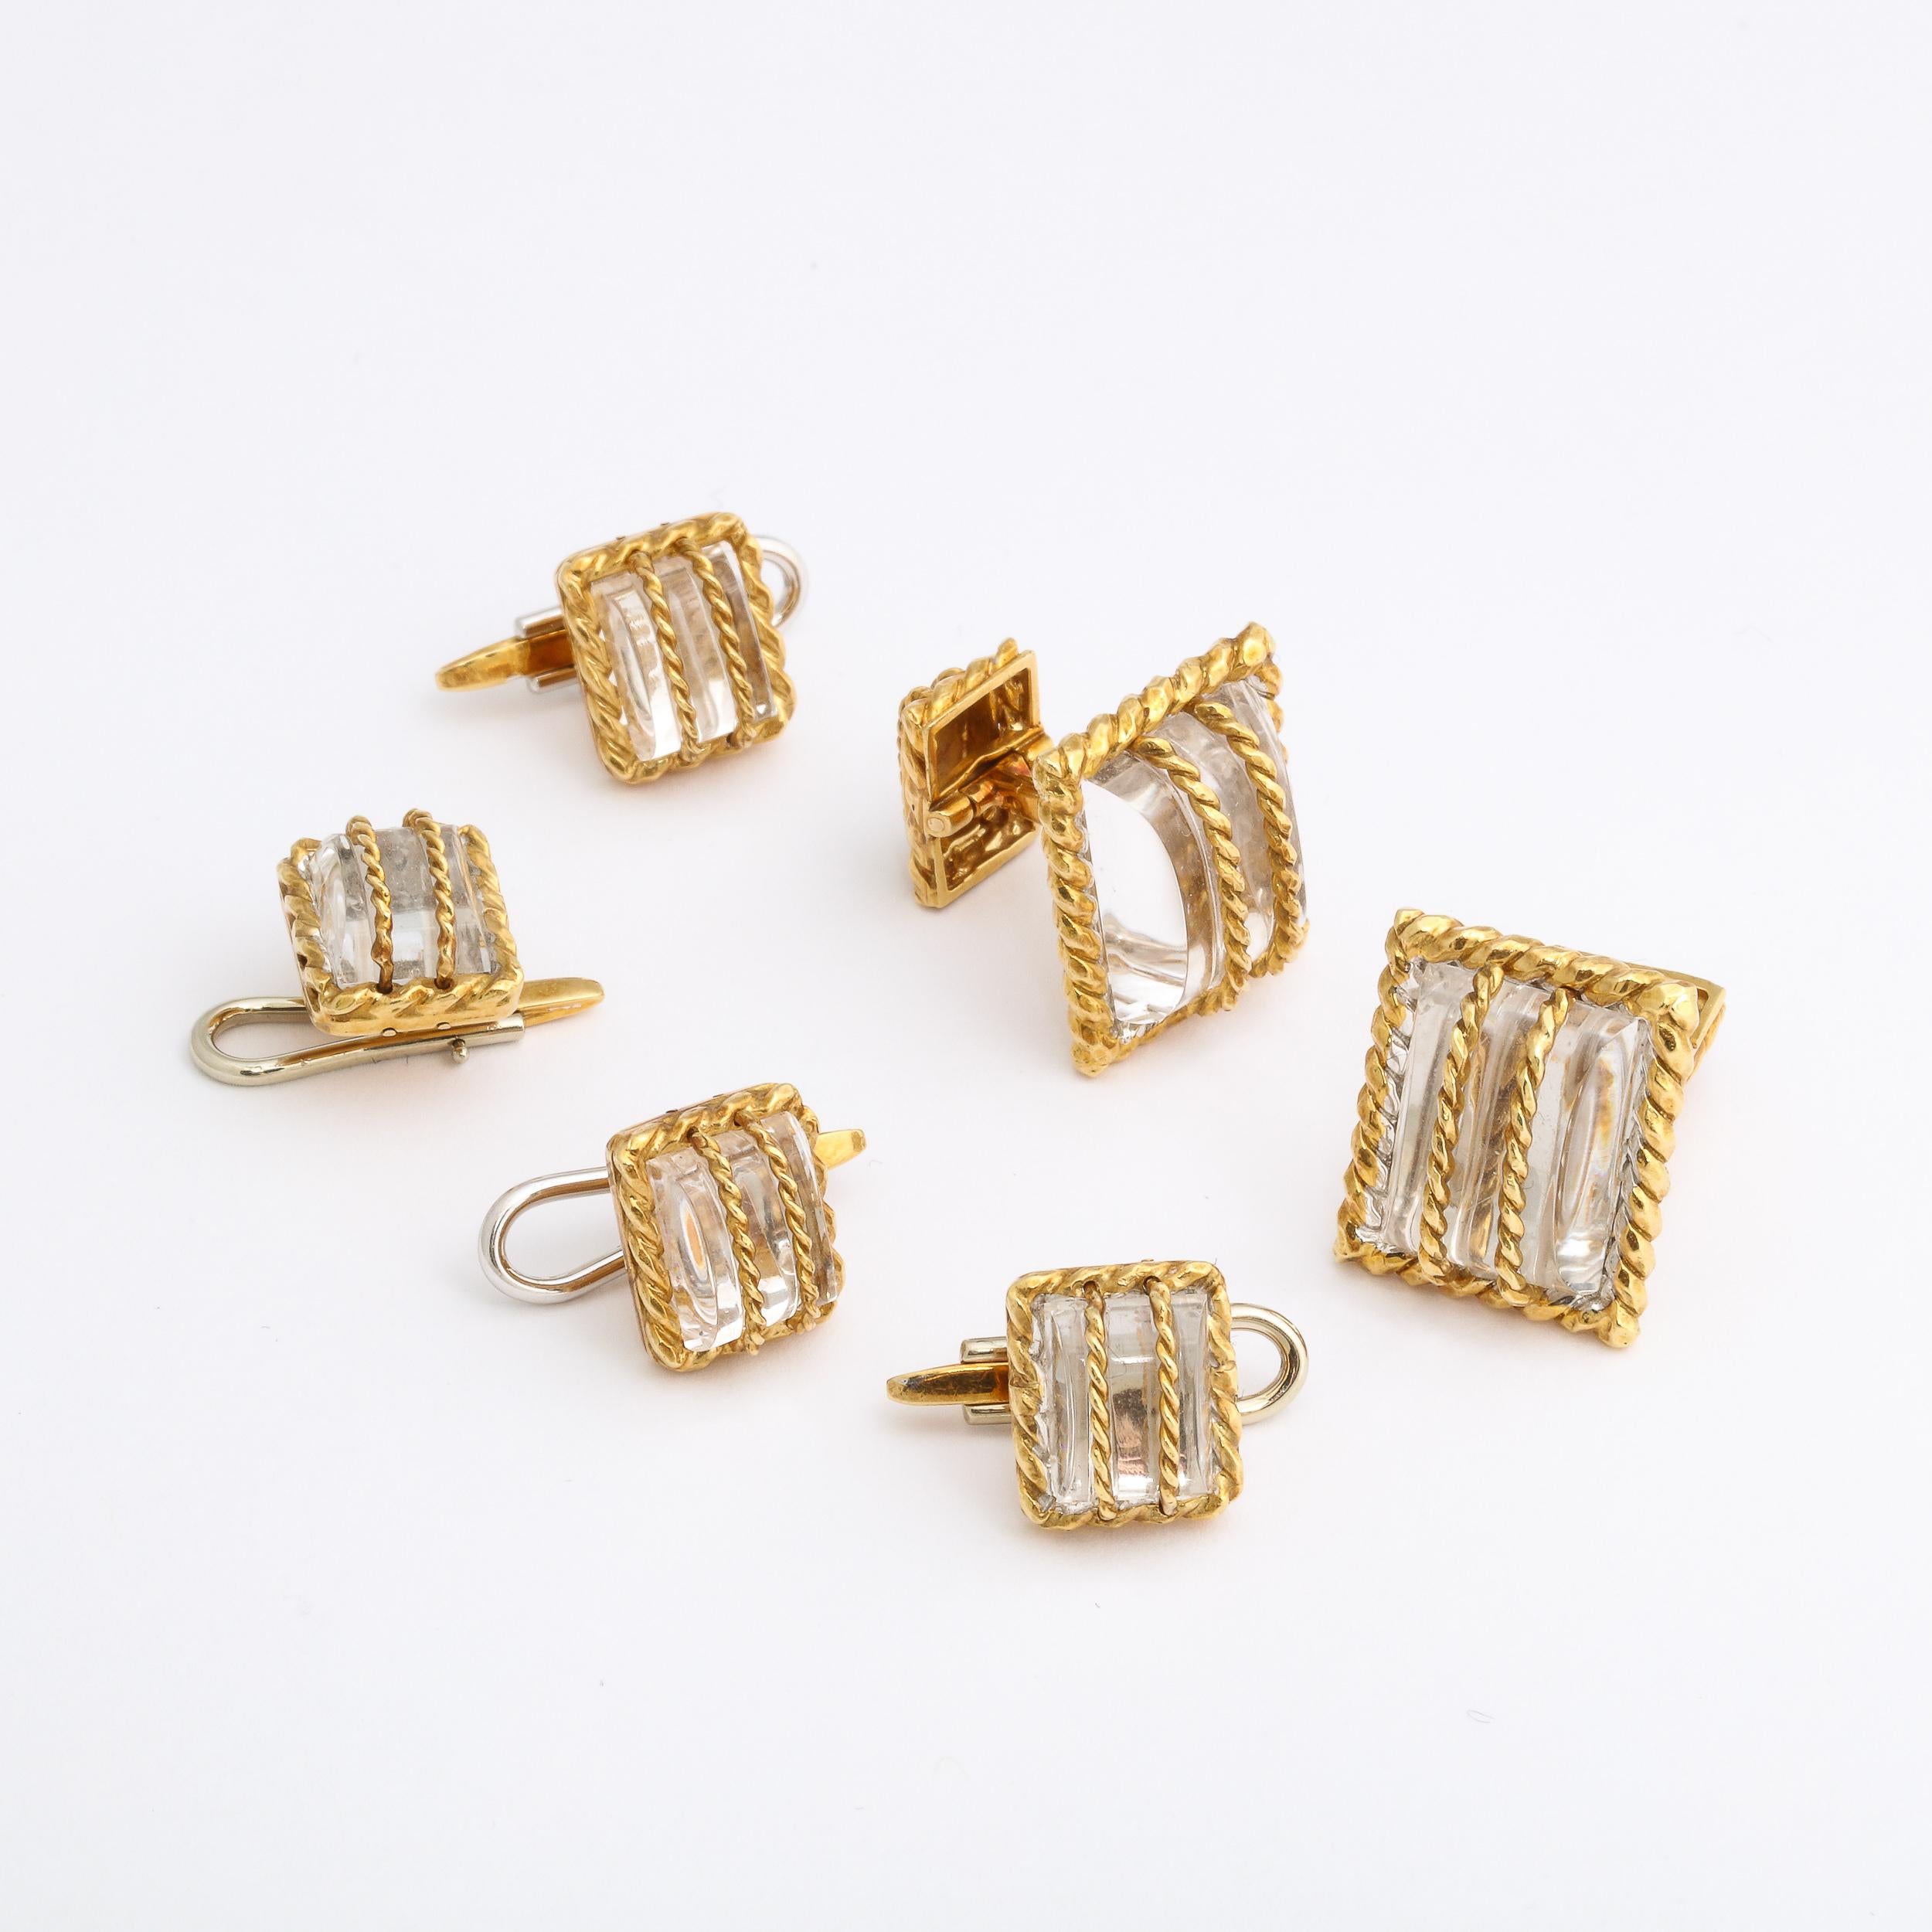 David Webb  18k Yellow Gold & Crystal  6 Piece Cufflink and Stud Set  For Sale 12